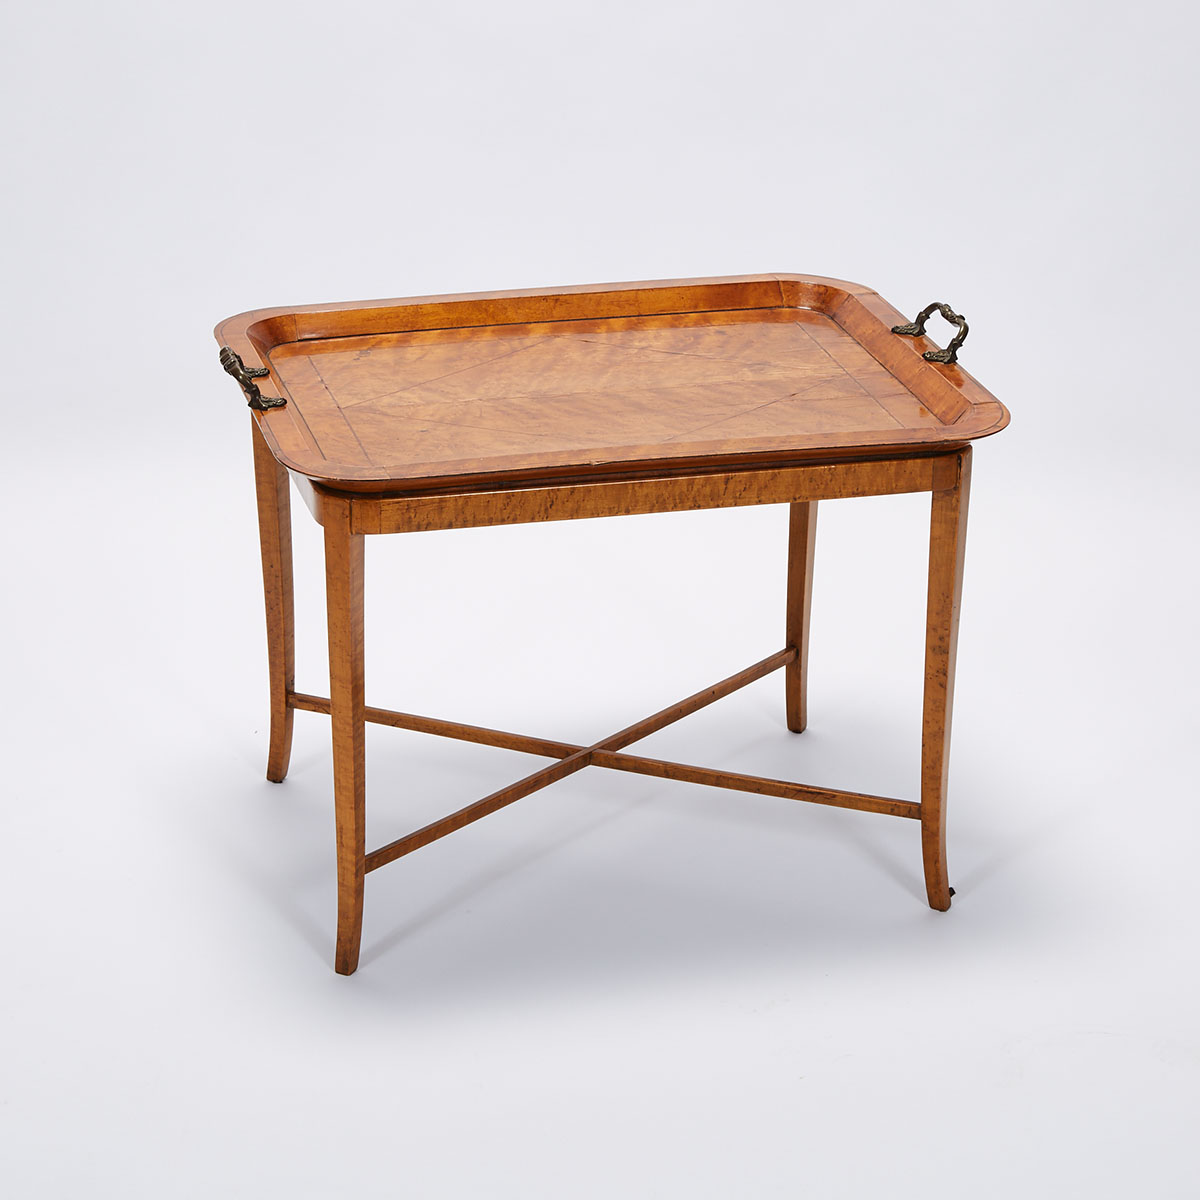 Victorian BIrd’s Eye Maple Tea Tray on Stand, 19th or early 20th century